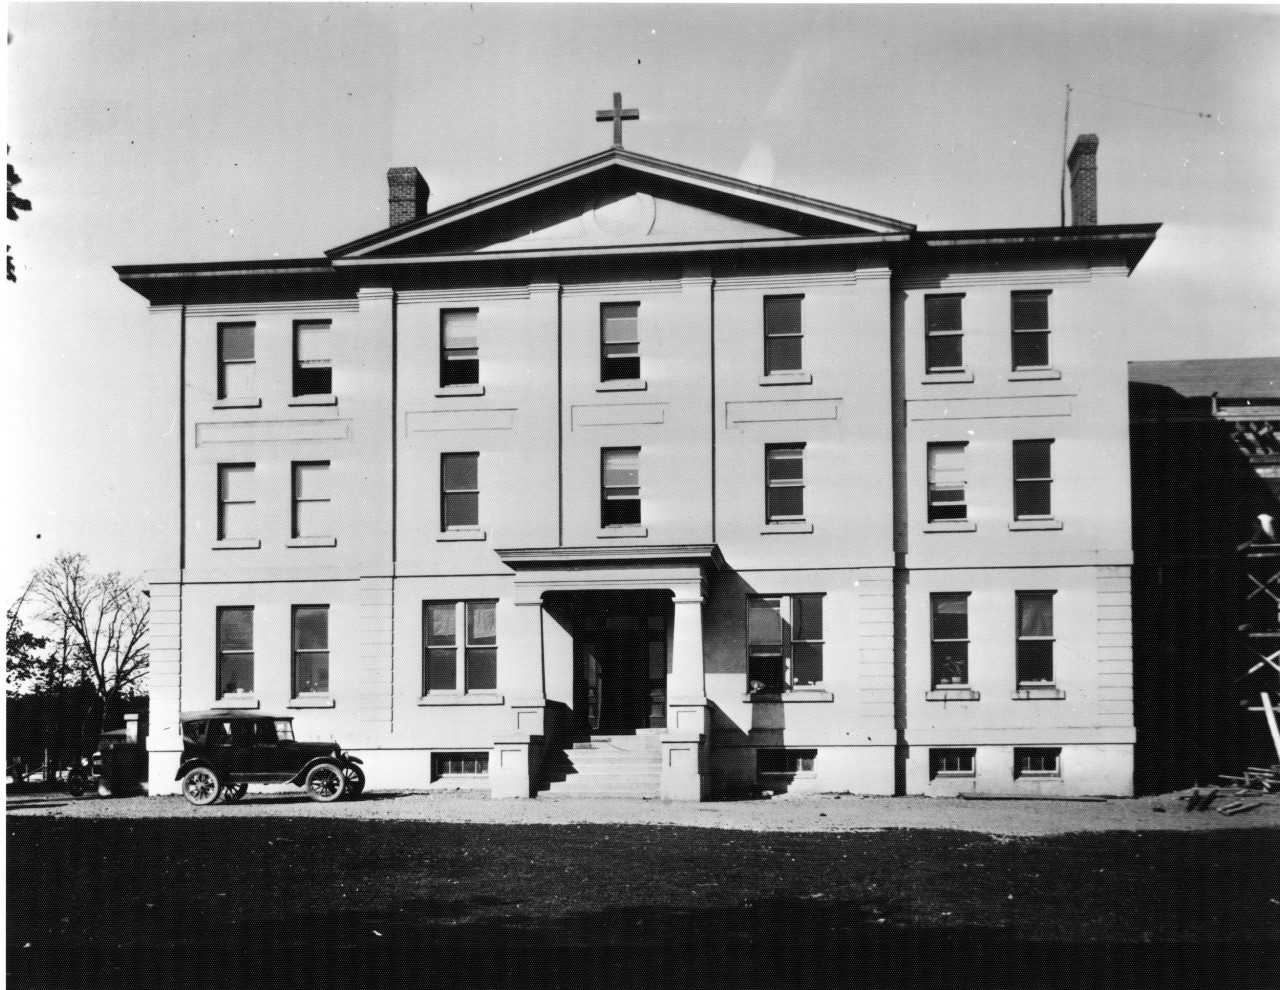 The court-ordered compensation to victims had the Christian Brothers demolish the orphanage and sell the land to property developers for $8 million, which was paid to victims. City of St. John's Archive 